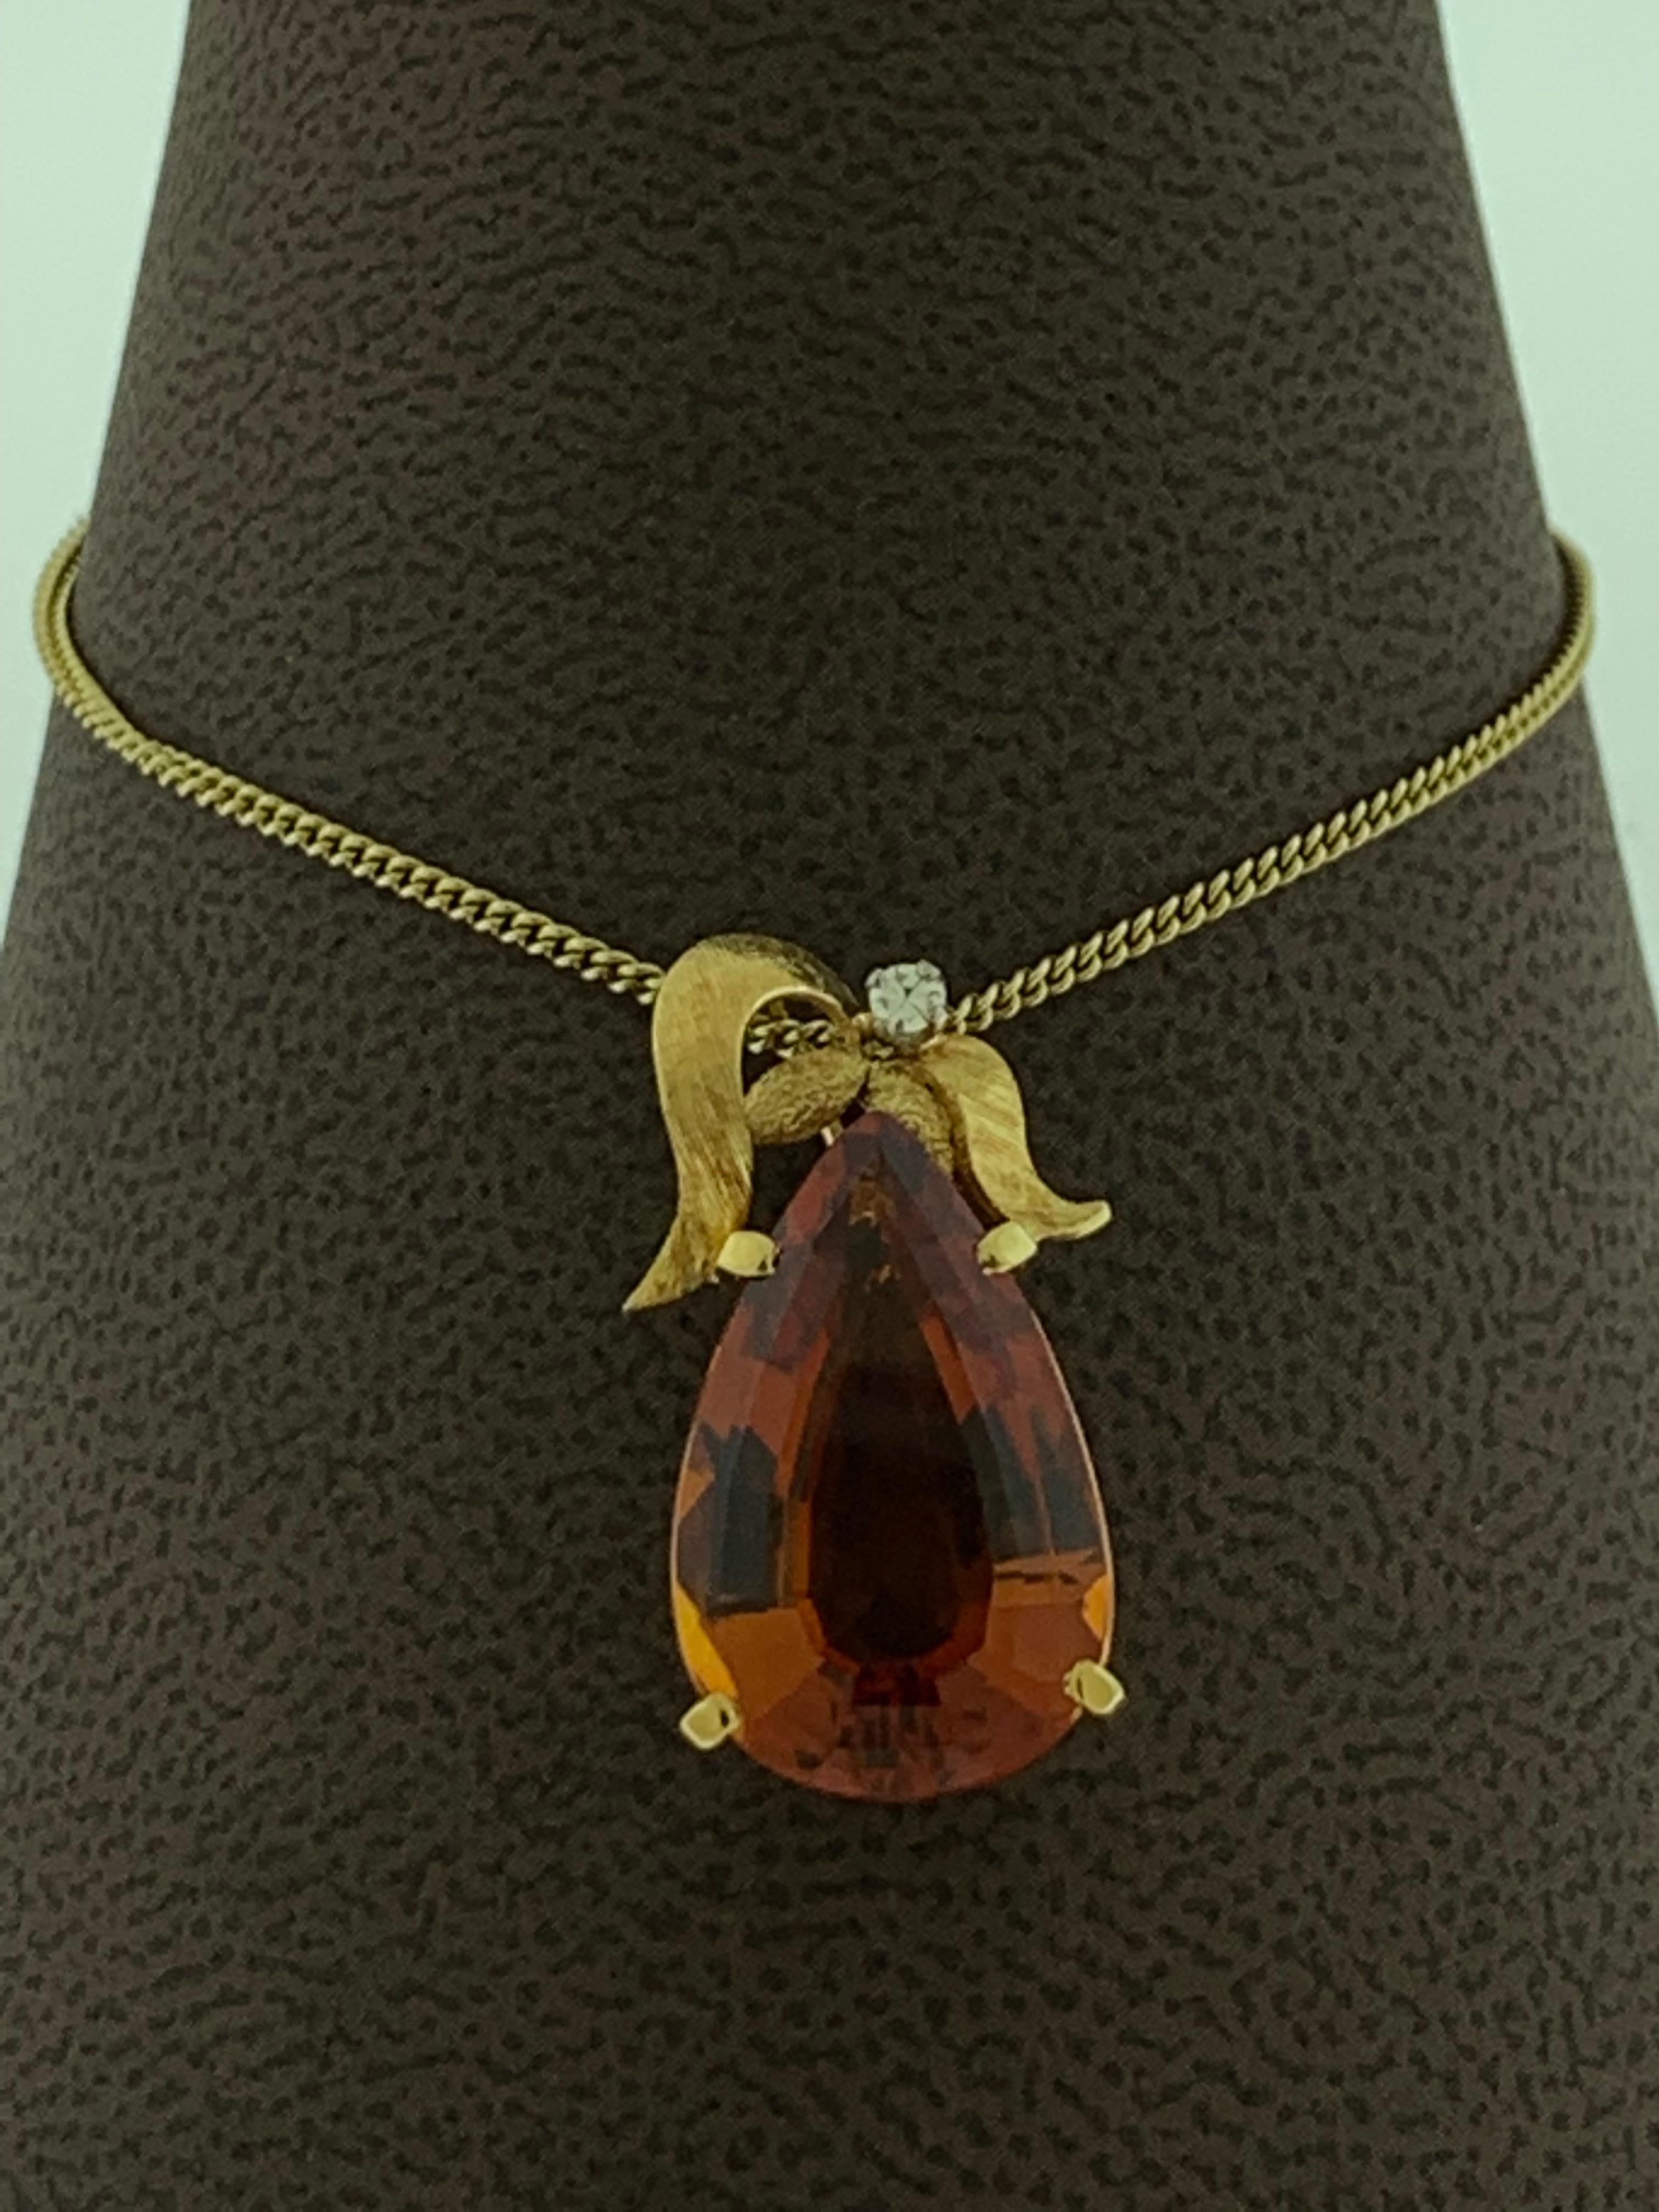 Pear Cut 1970s Yellow Gold and Imperial Topaz Pendant Necklace by H Stern 18 Karat Gold